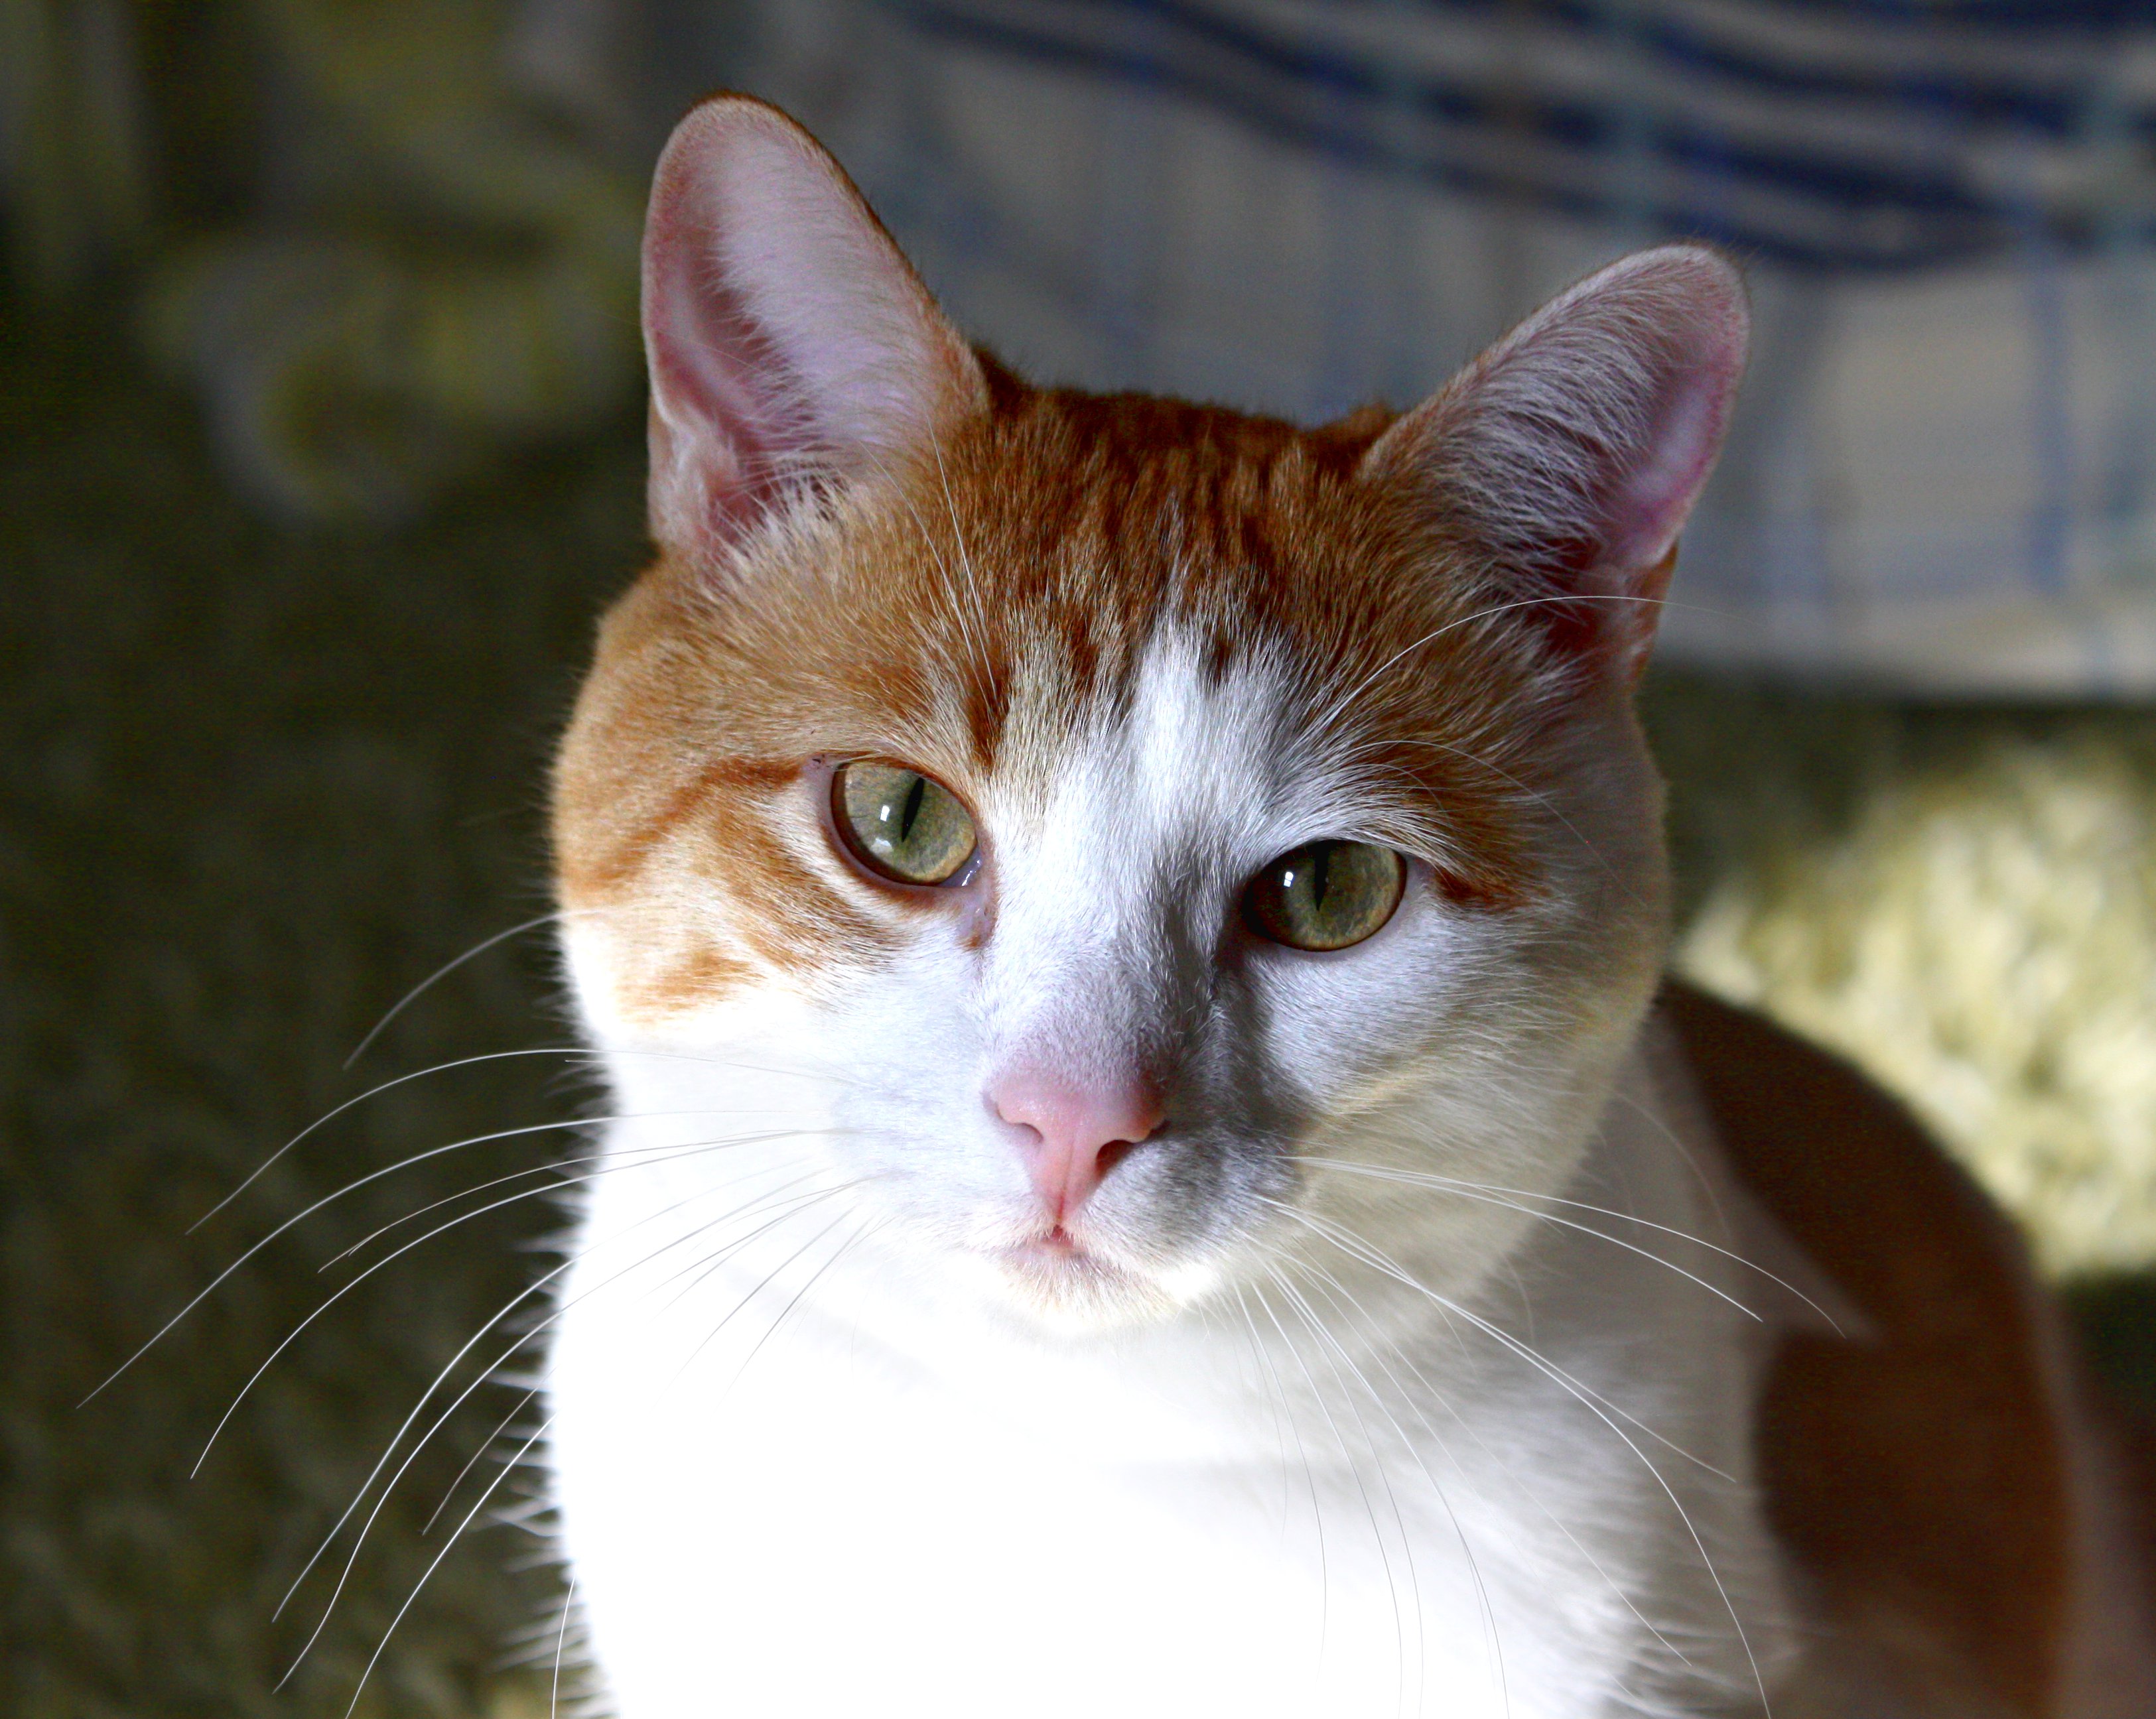 Orange and White Cat Closeup Picture | Free Photograph | Photos ...